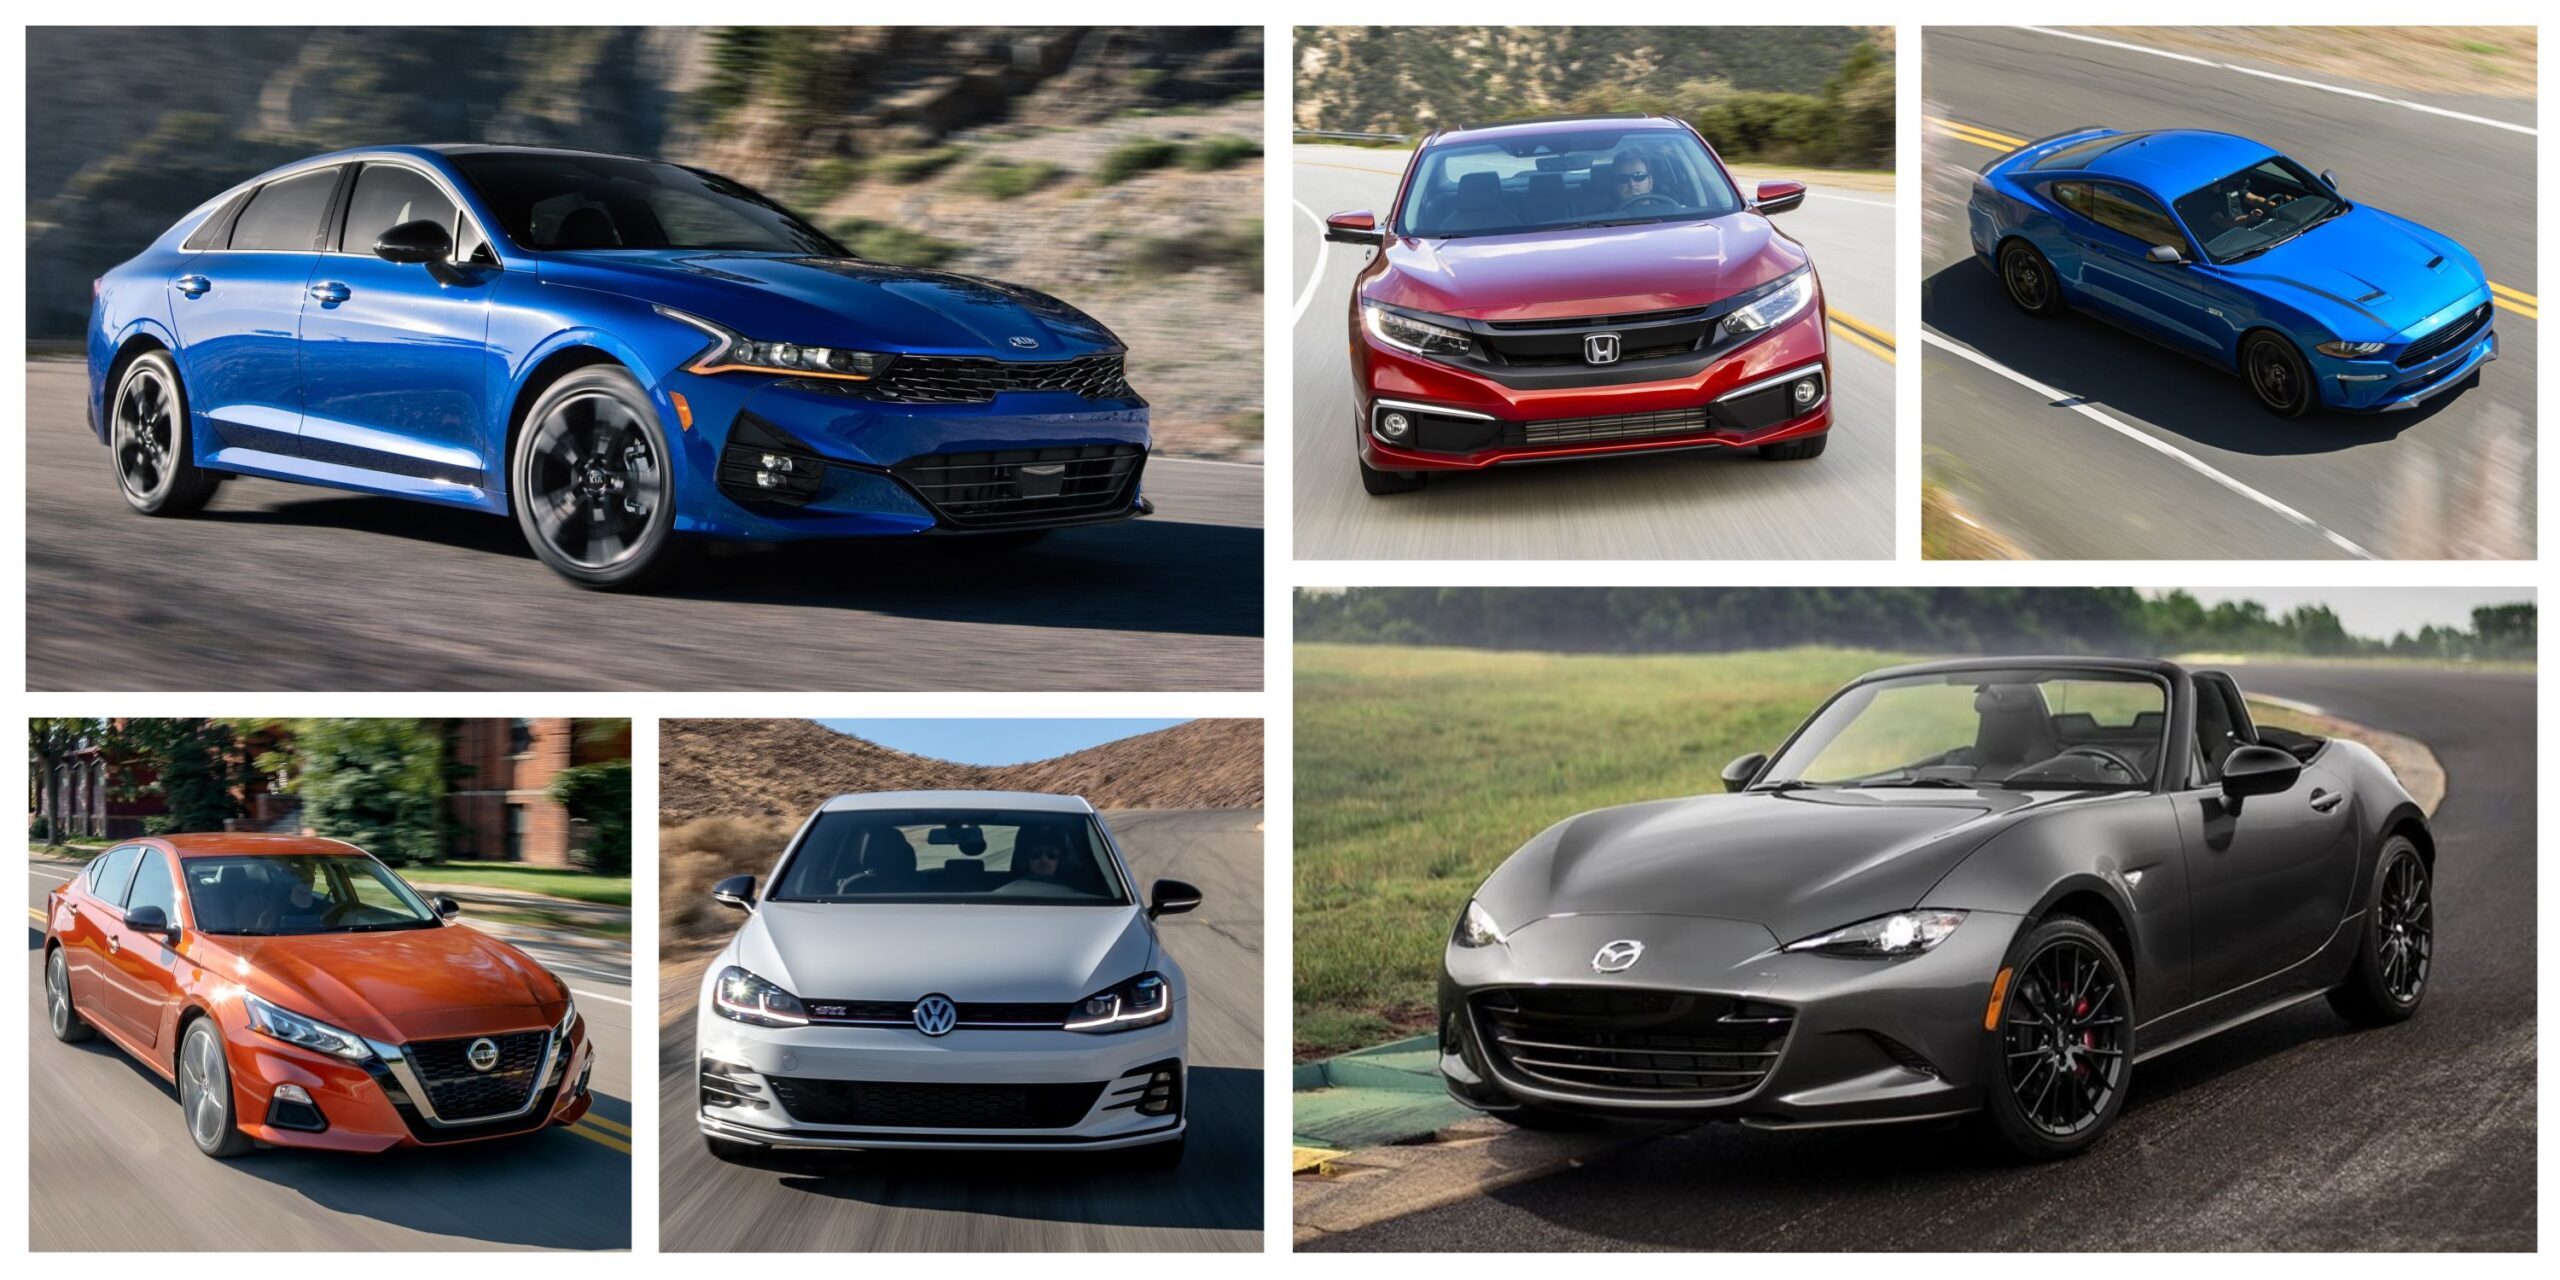 Best Midsize Cars Under $ 30,000 in US